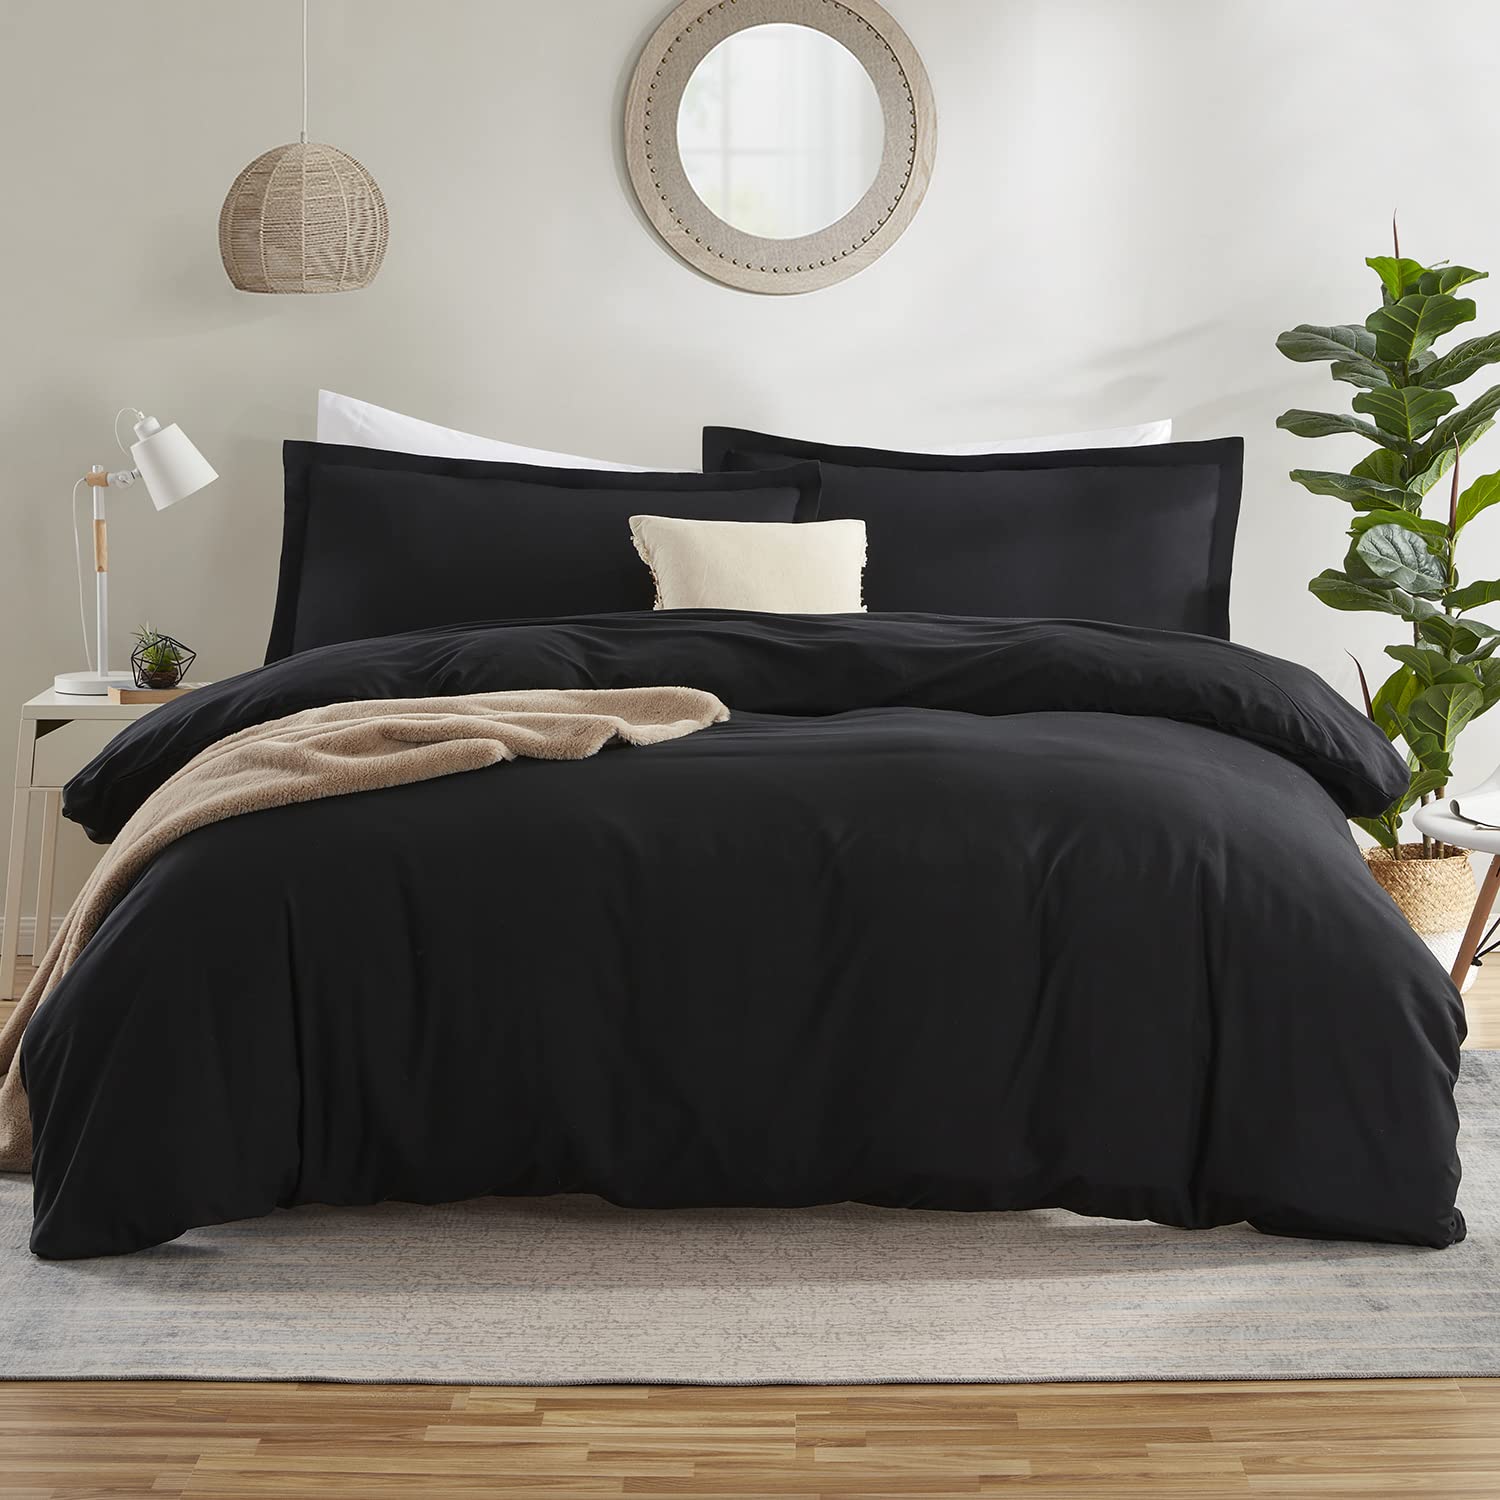 Book Cover Nestl Black Duvet Cover Queen Size - Soft Queen Duvet Cover Set, 3 Piece Double Brushed Queen Size Duvet Covers with Button Closure, 1 Duvet Cover 90x90 inches and 2 Pillow Shams Black Queen